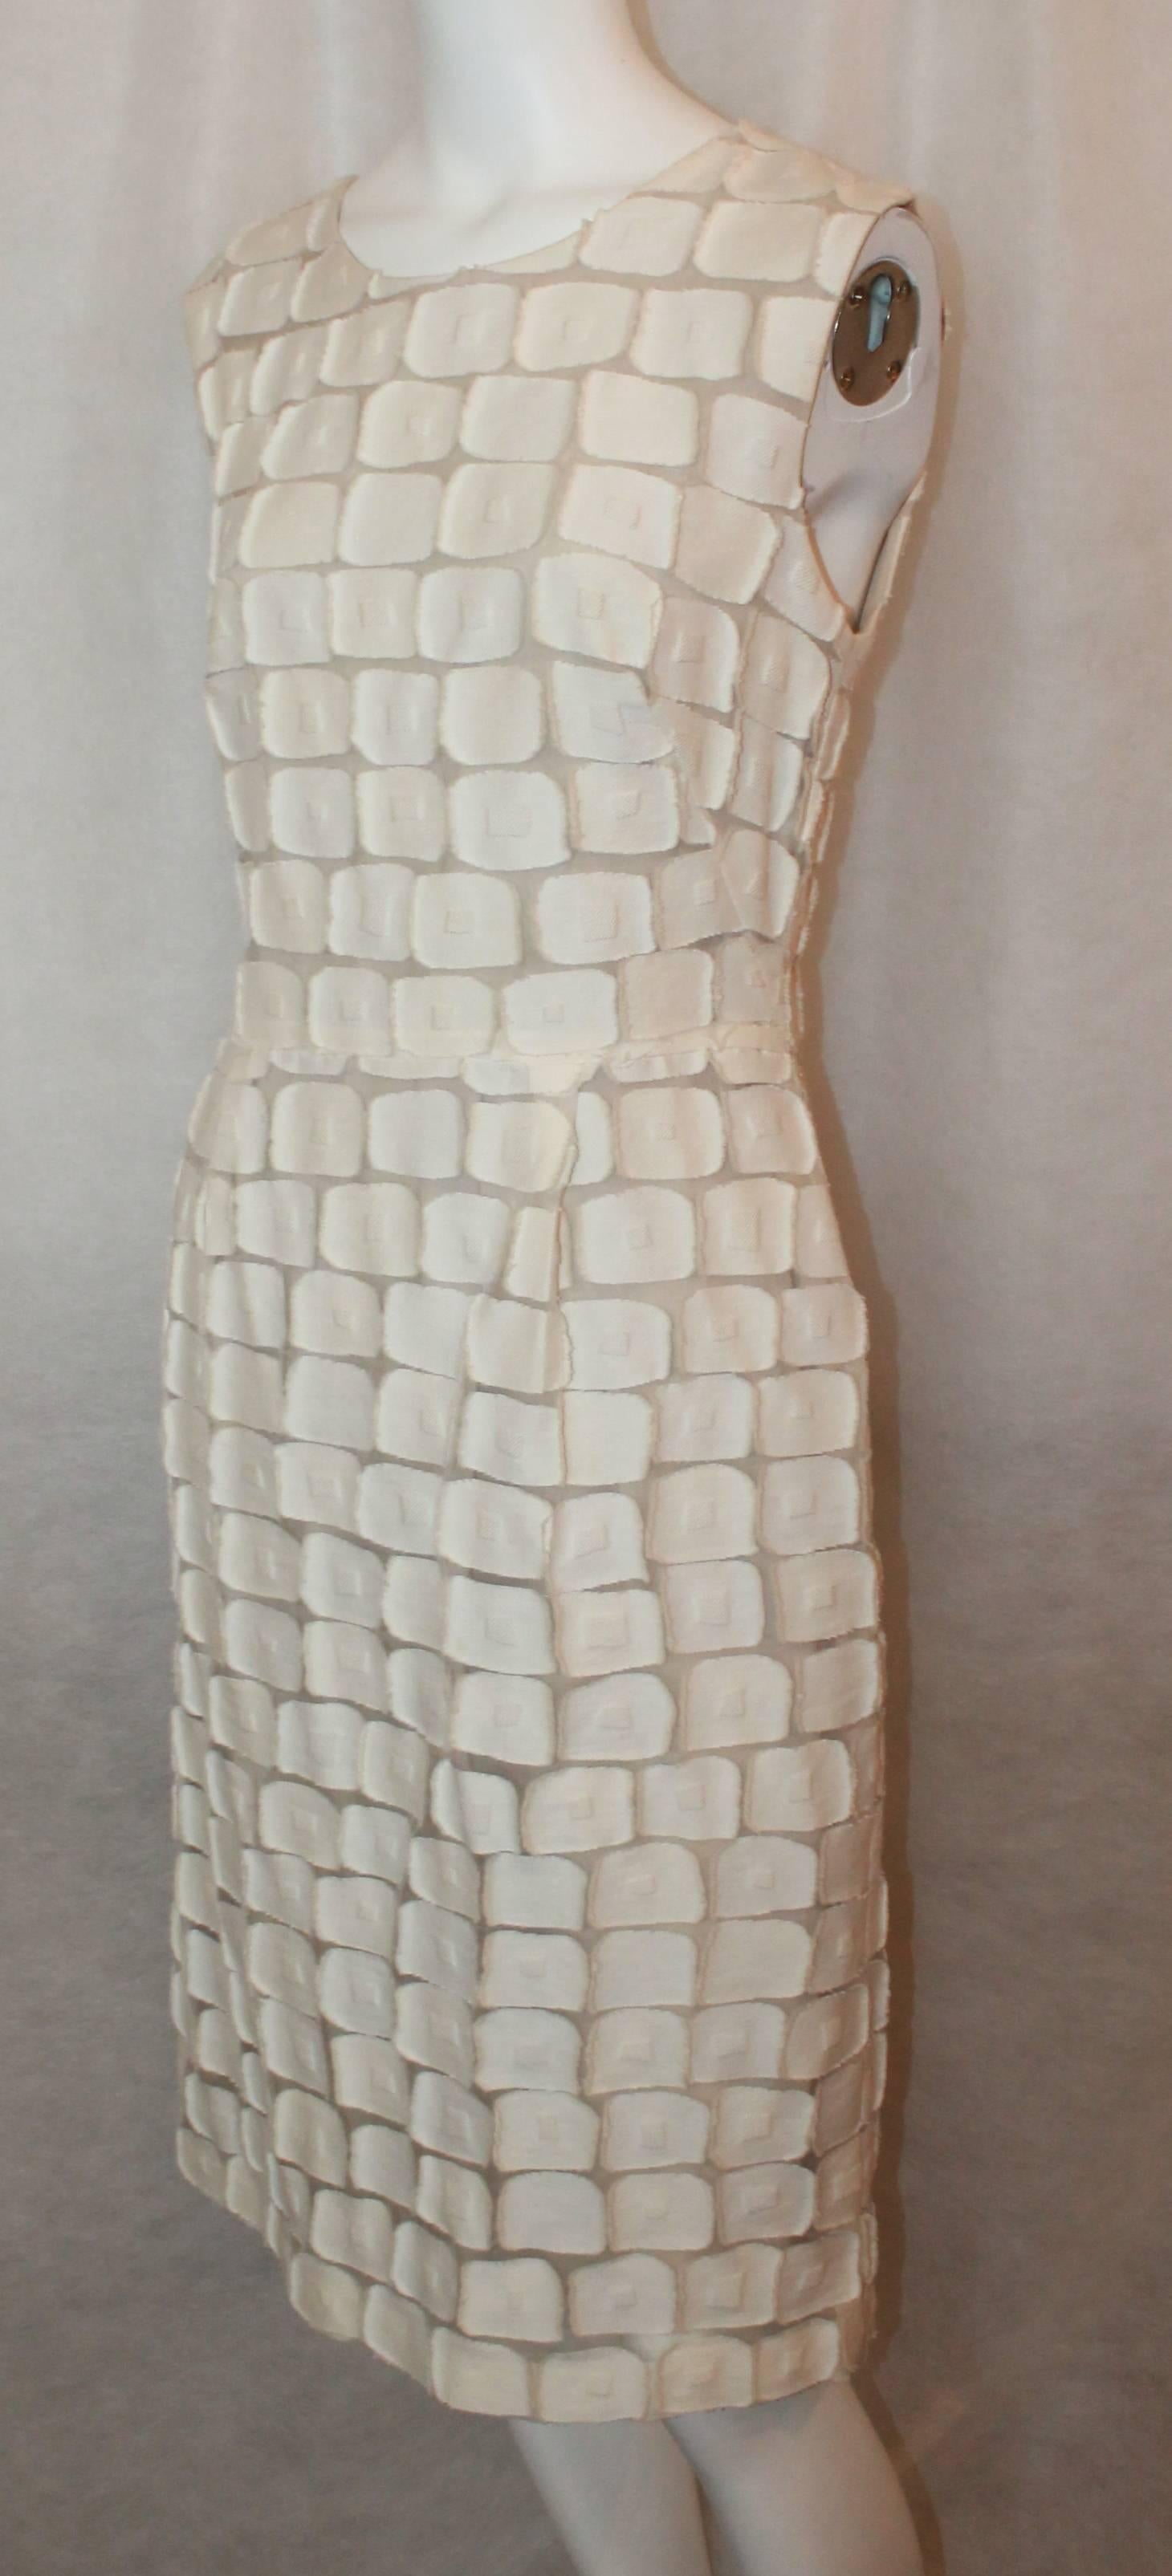 Lela Rose Ivory Cotton Blend Sleeveless Patchwork Dress - 8. This fitted dress is in excellent condition and has a unique look. The patchwork is comprised of squares and the piece has front pleats. The dress has a back